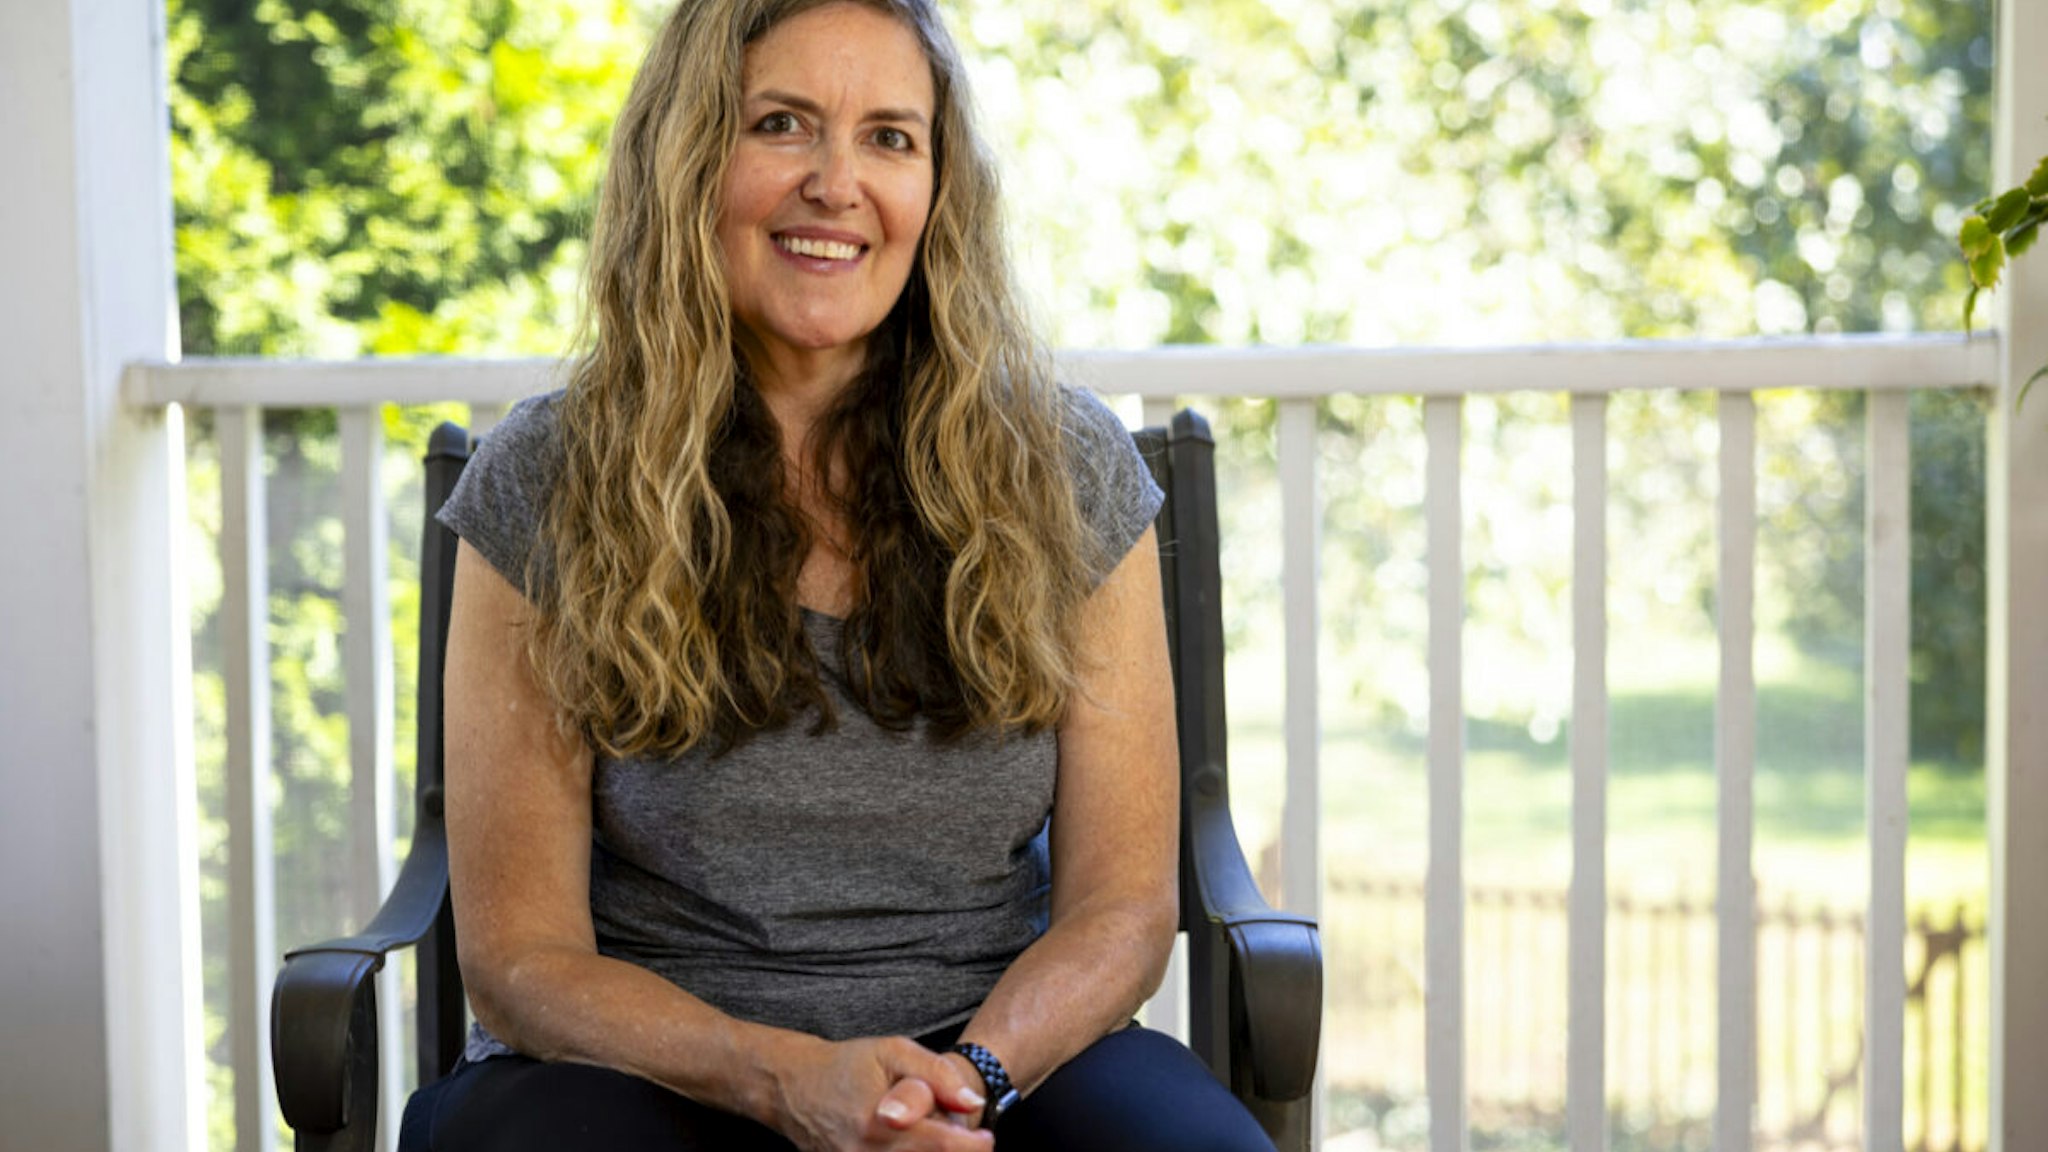 Congresswoman Jennifer Wexton of Virginia's 10th District, seen here at her home in Leesburg, VA on September 16, 2023, will not seek reelection due to being diagnosed with progressive supra nuclear palsy, a degenerative neurological disease.